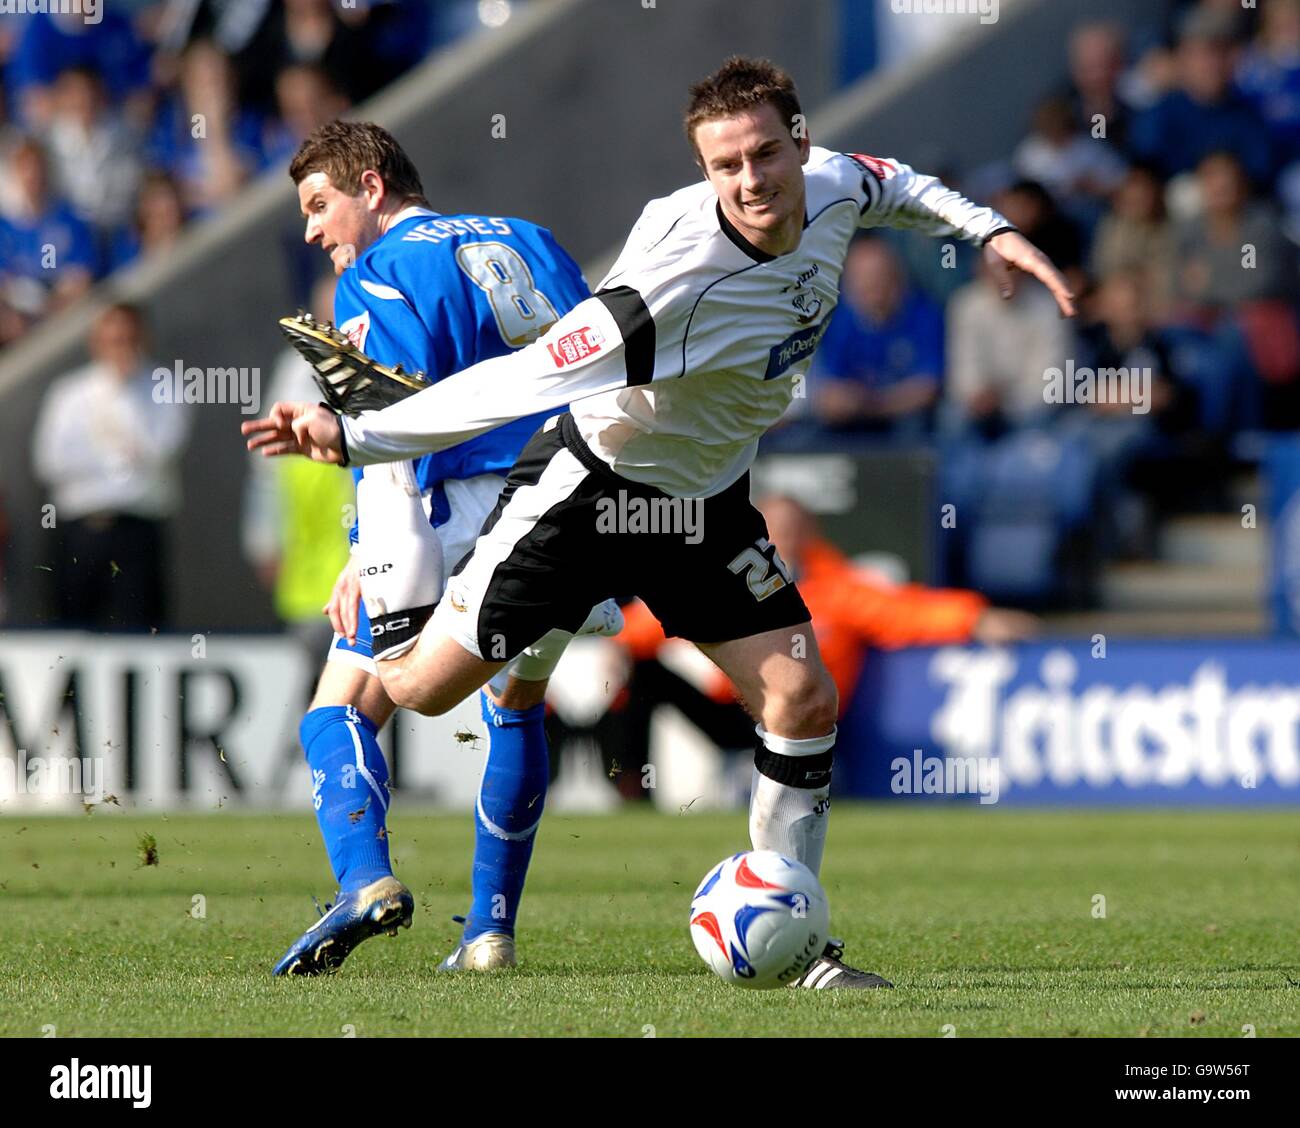 Soccer - Coca-Cola Football League Championship - Leicester City v Derby County - The Walkers Stadium. Derby County's Matt Oakley and Leicester City's Mark Yeates battle for the ball Stock Photo